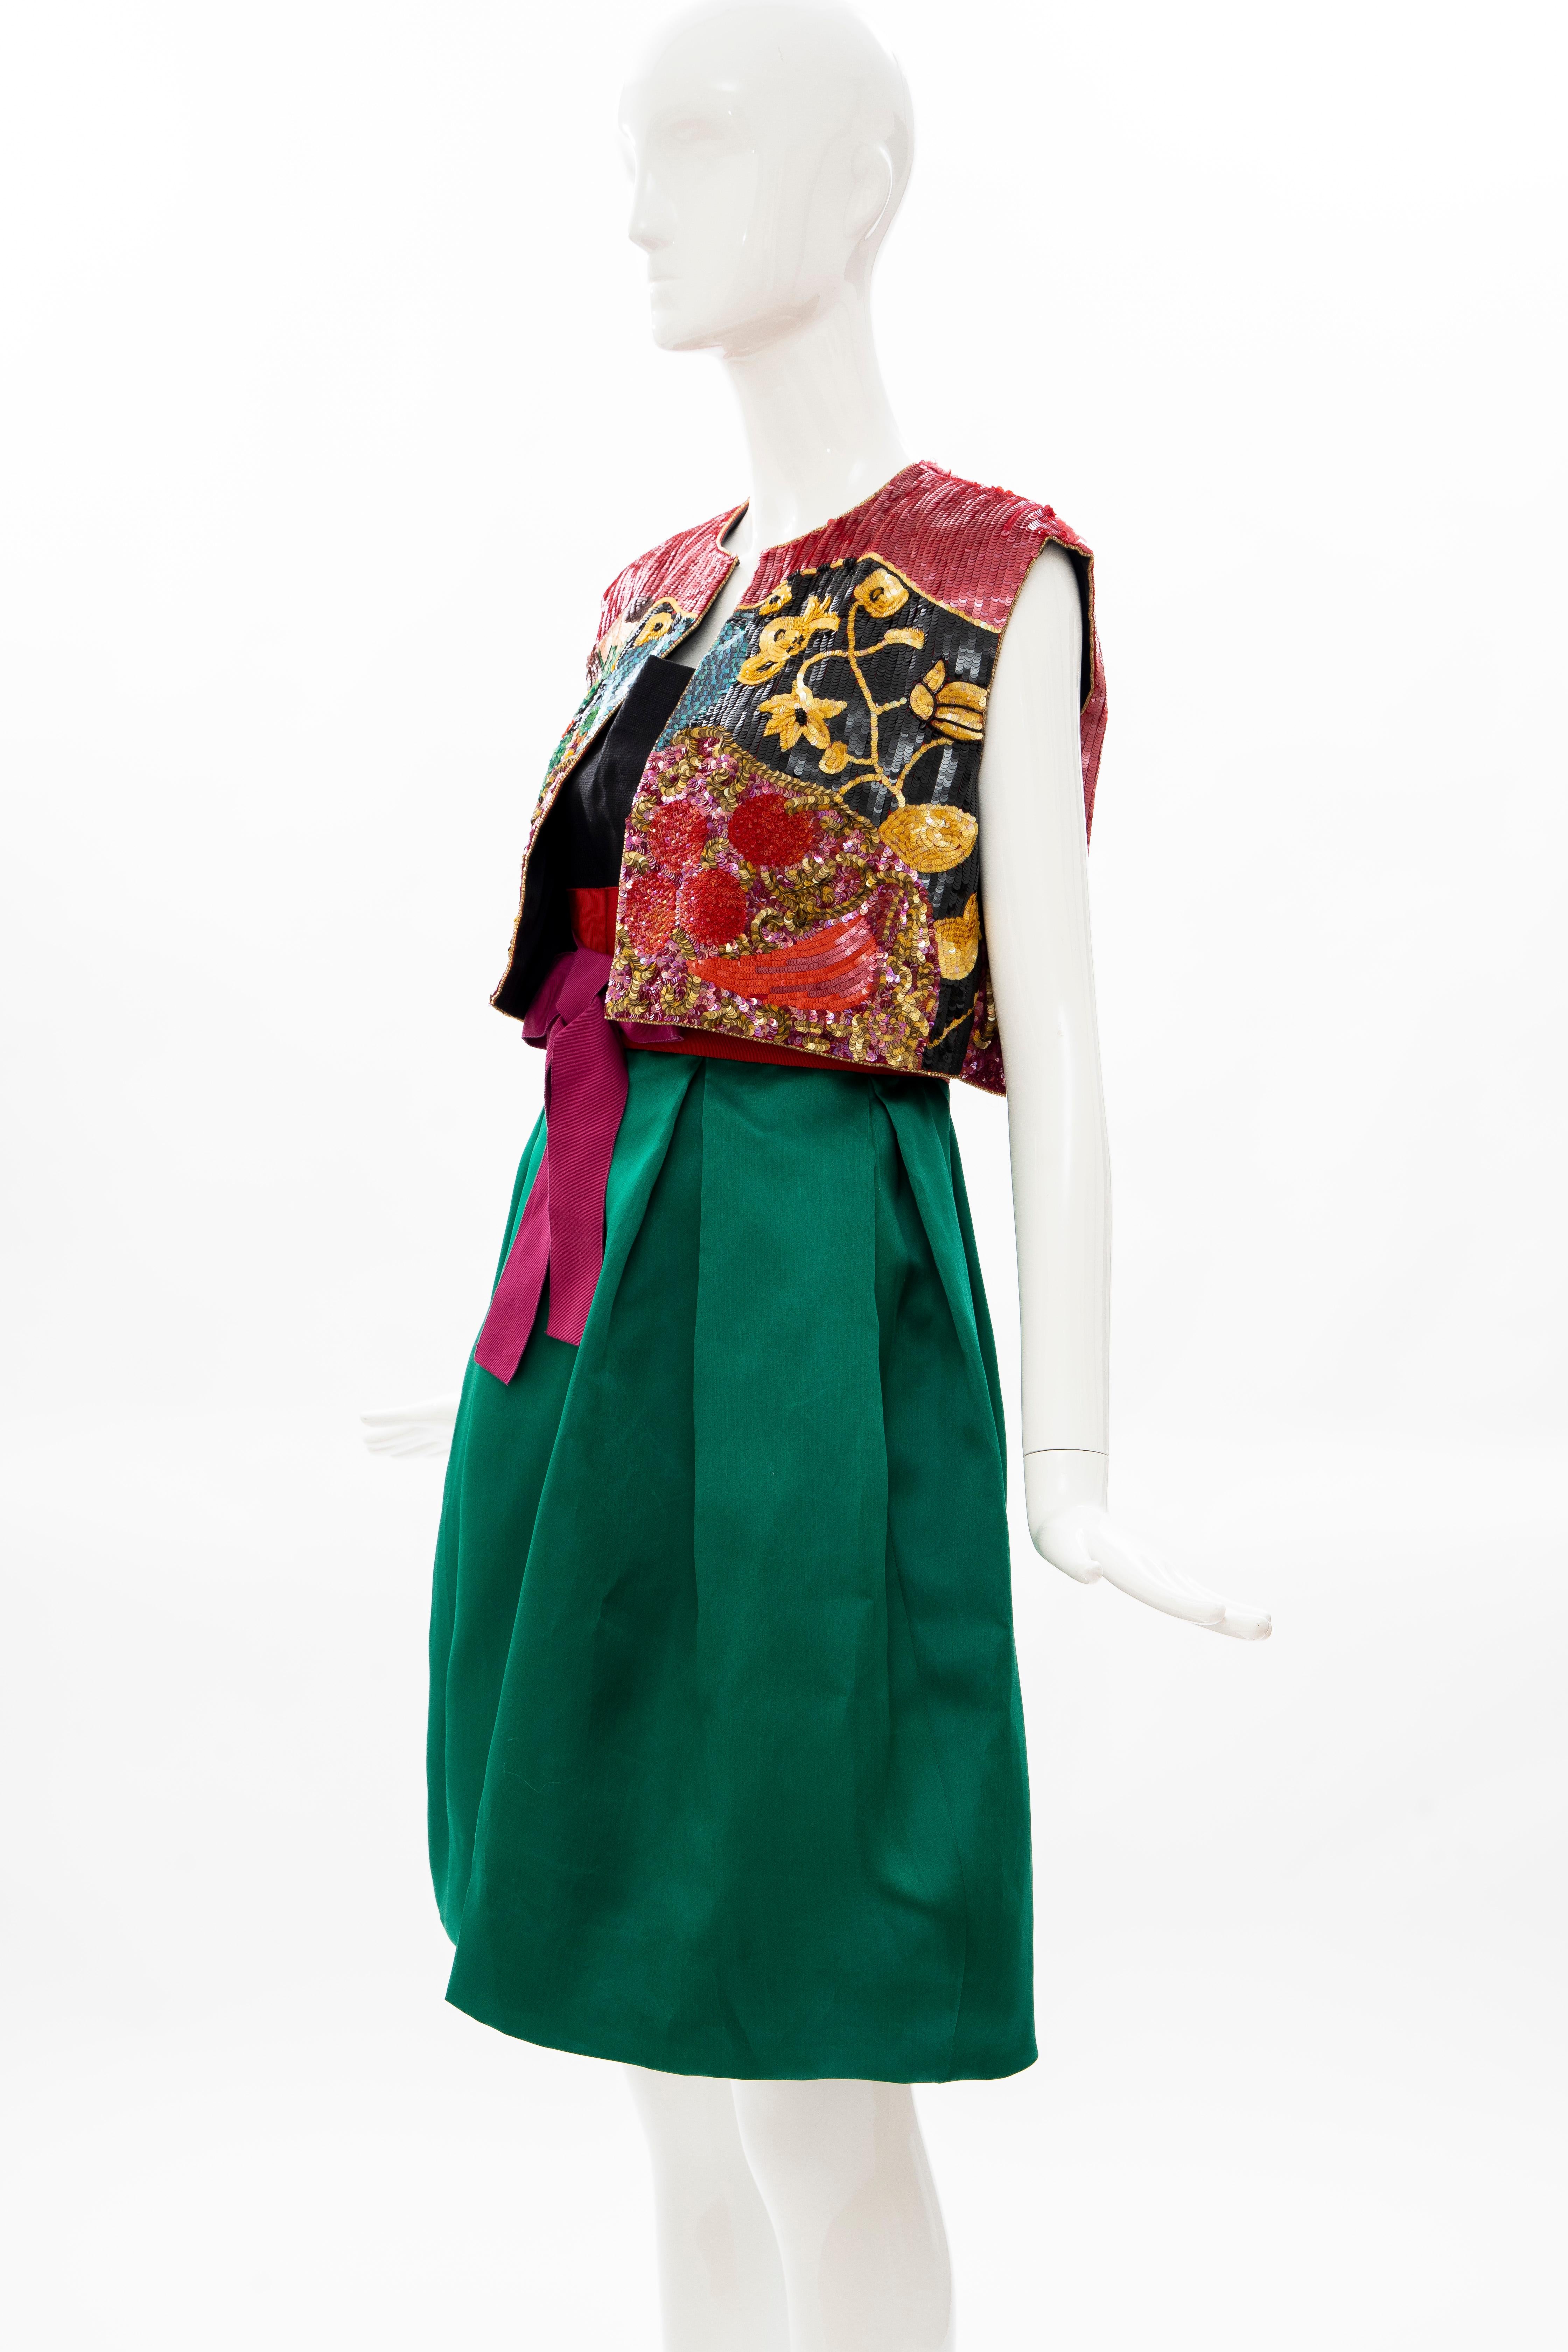 Bill Blass Matisse Inspired Embroidered Sequined Dress Ensemble, Spring 1988 For Sale 9